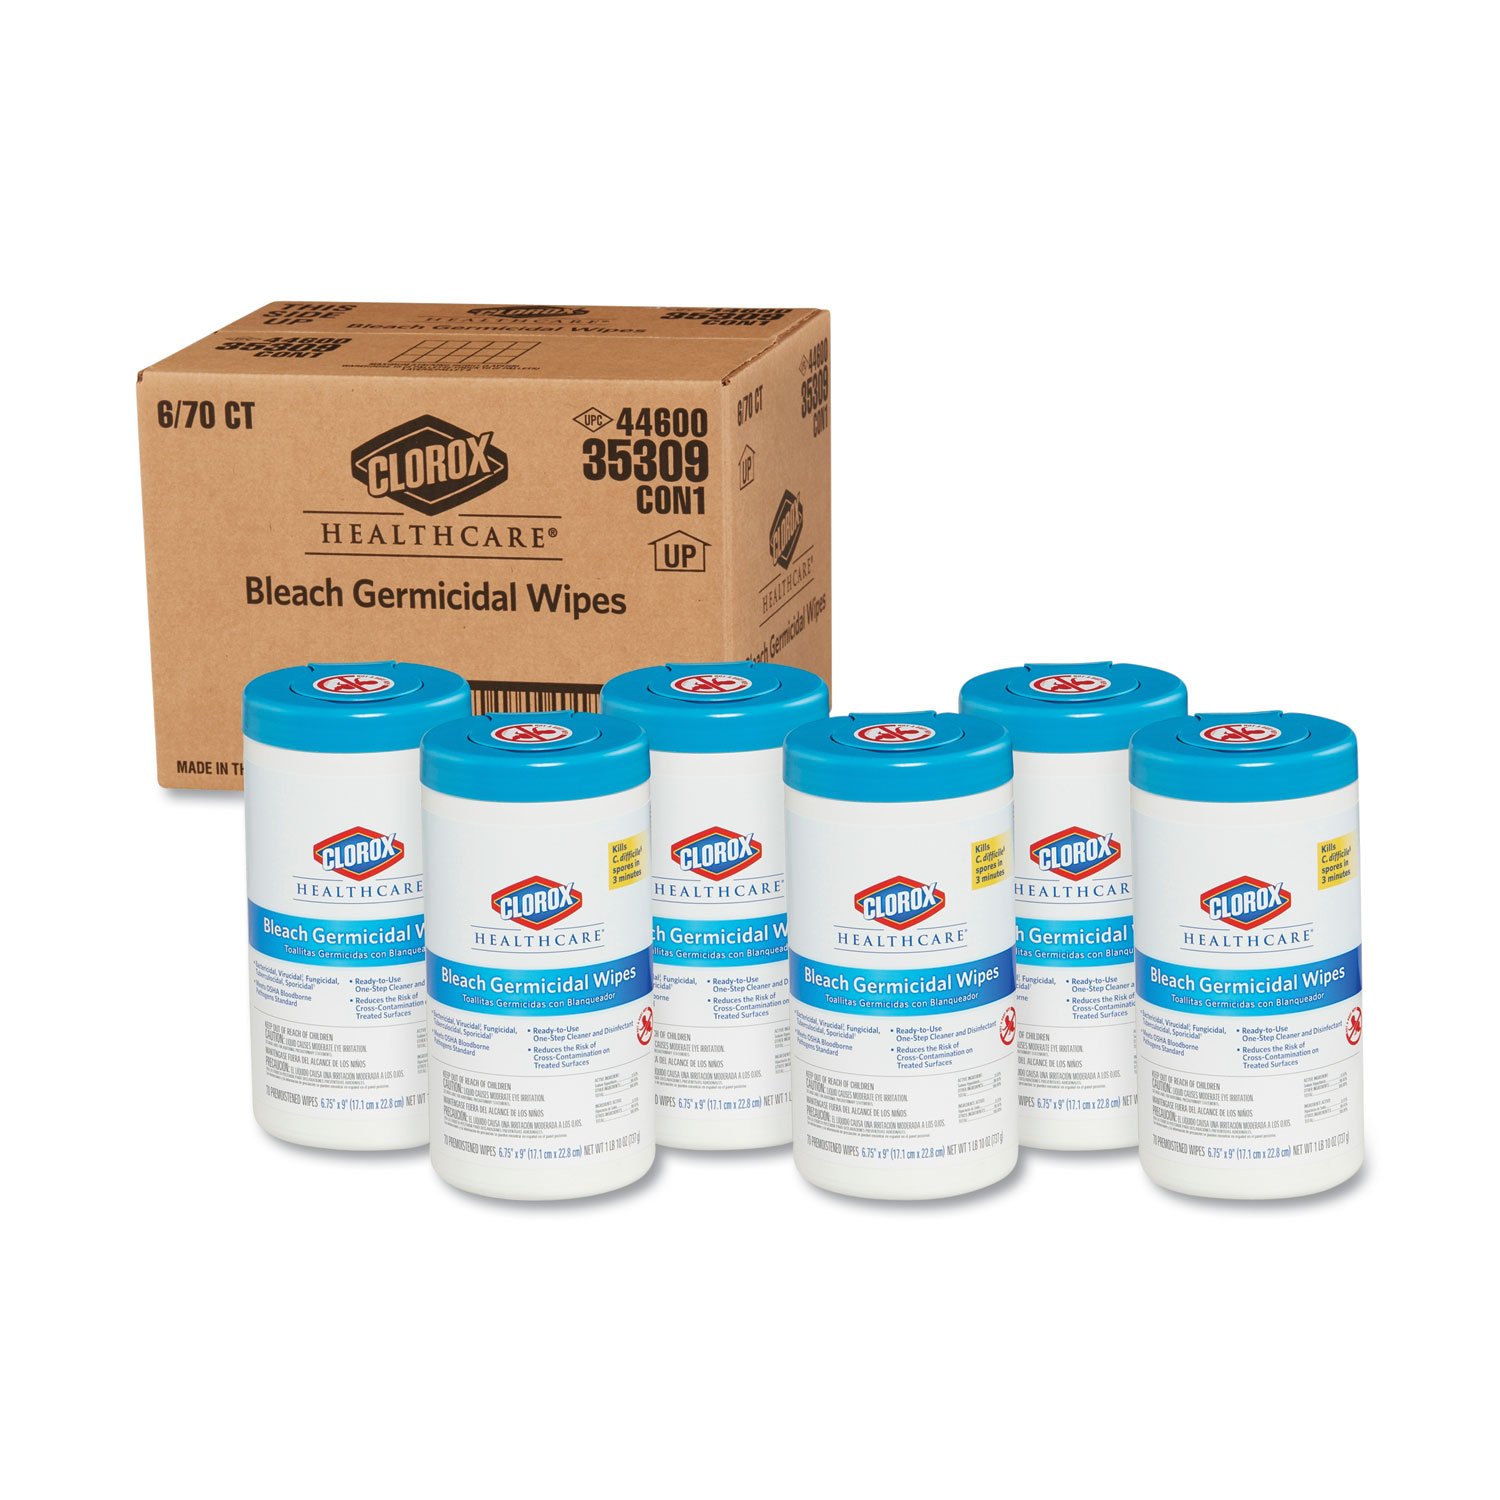  Clorox Healthcare CLO 35309 Bleach Germicidal Wipes, 6 3/4 x 9, Unscented, 70/Canister (CLO35309CT) 